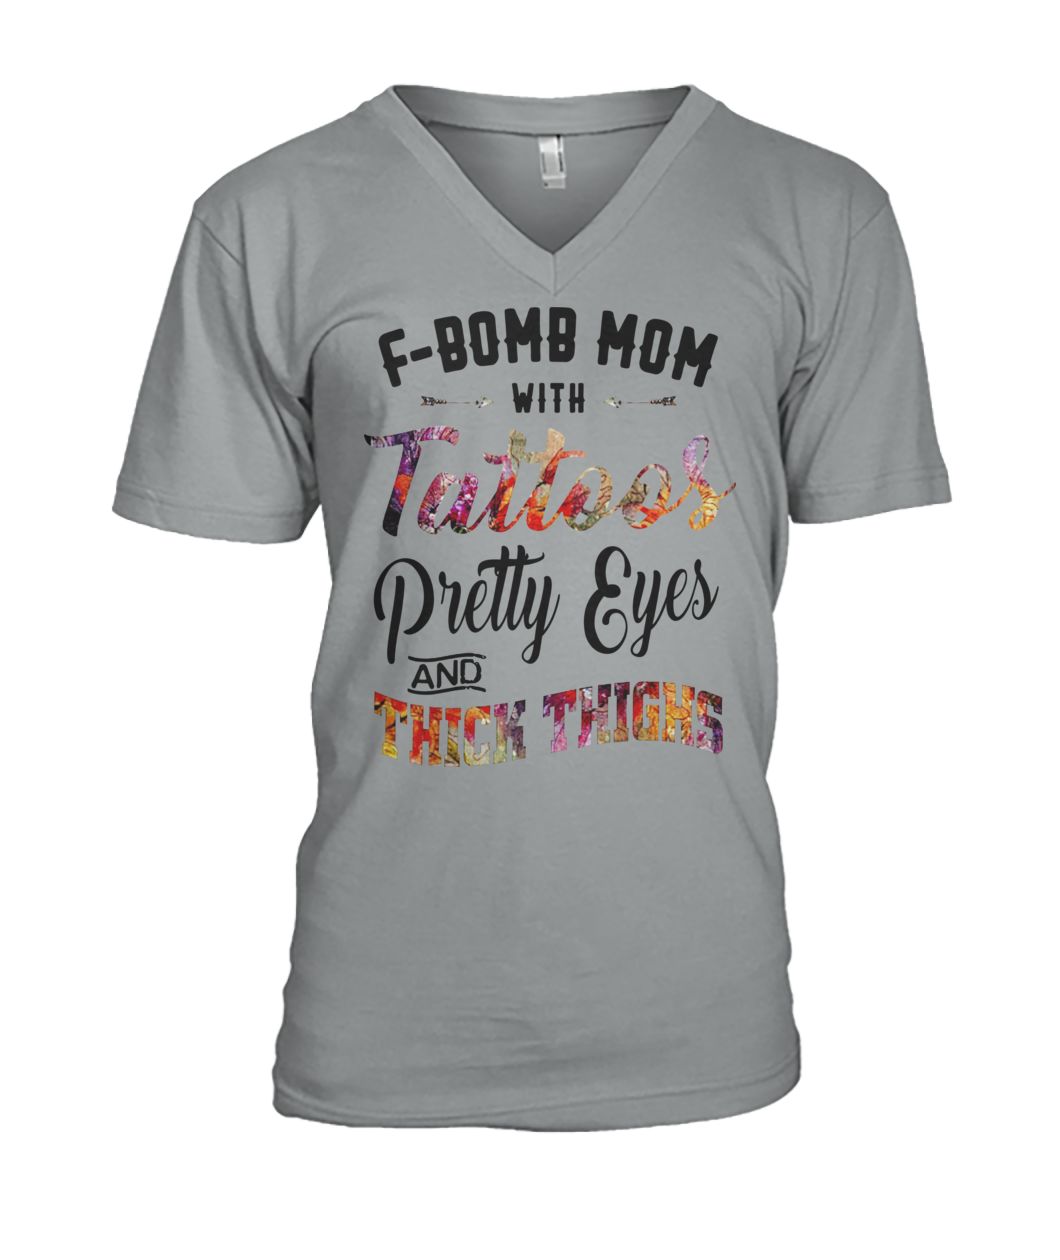 F bomb mom with tattoos pretty eyes and thick thighs mens v-neck